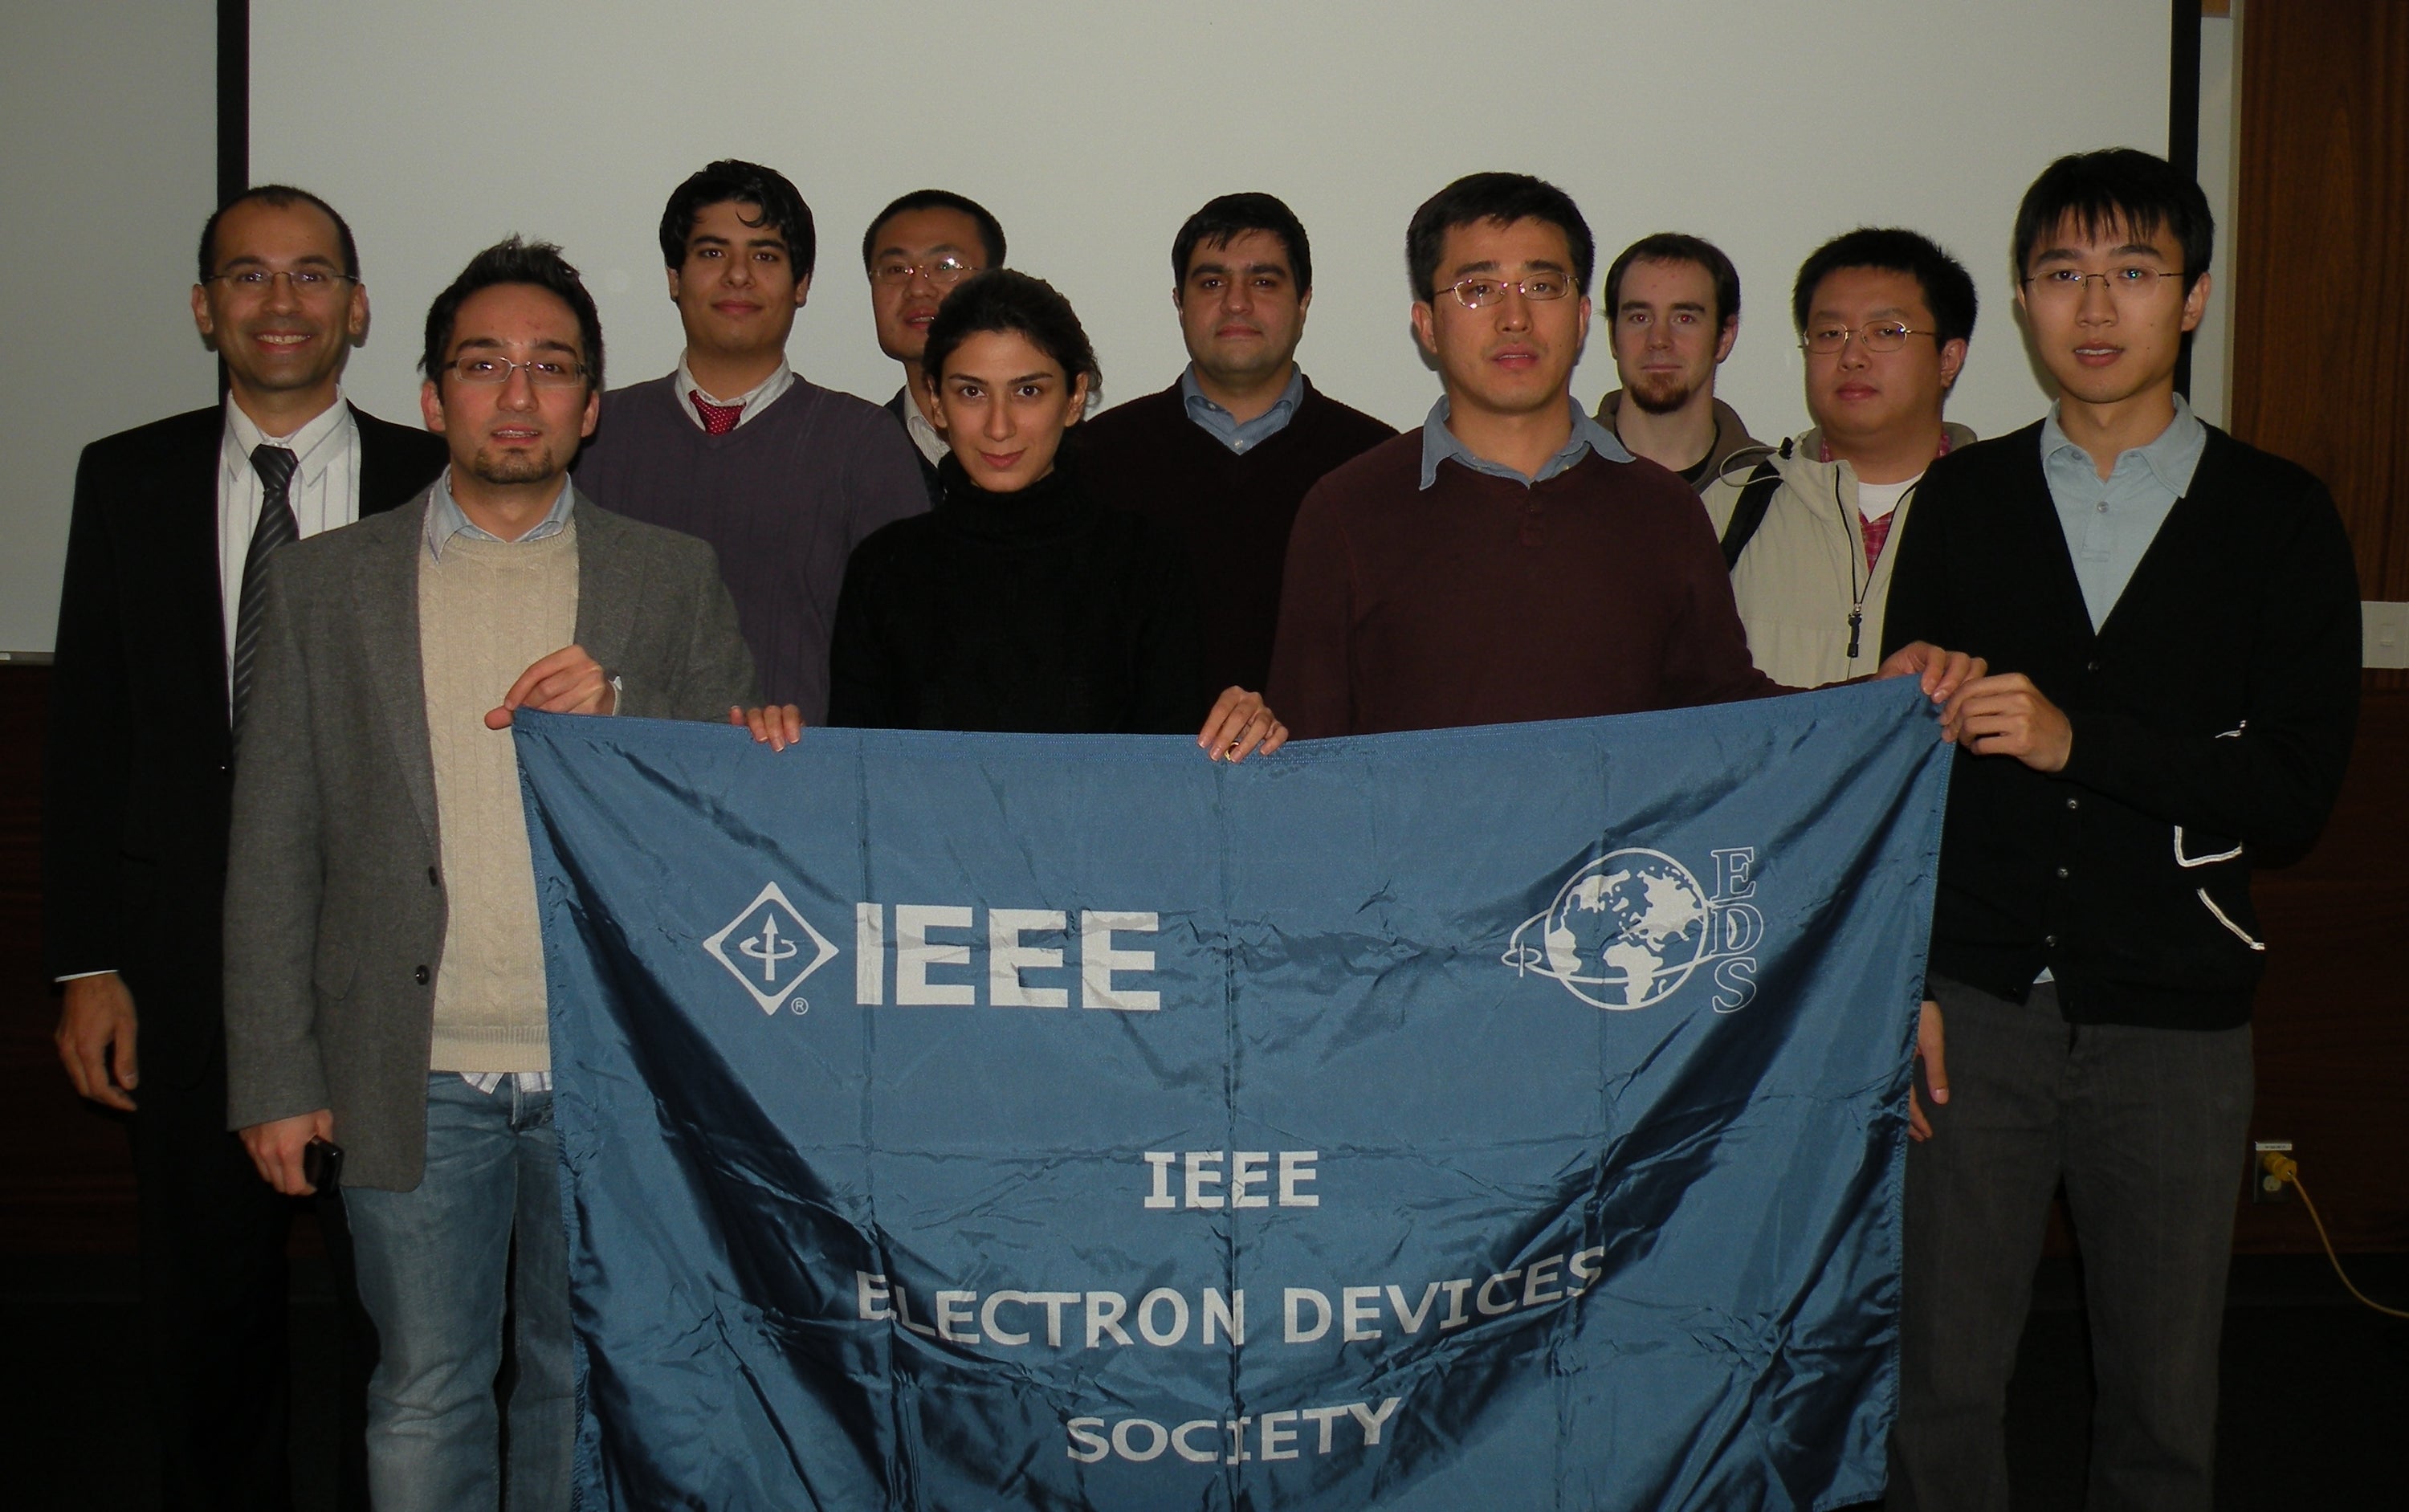 Half of the STAR group at IEEE mini-colloquium on large area electronics (November 6 2009).